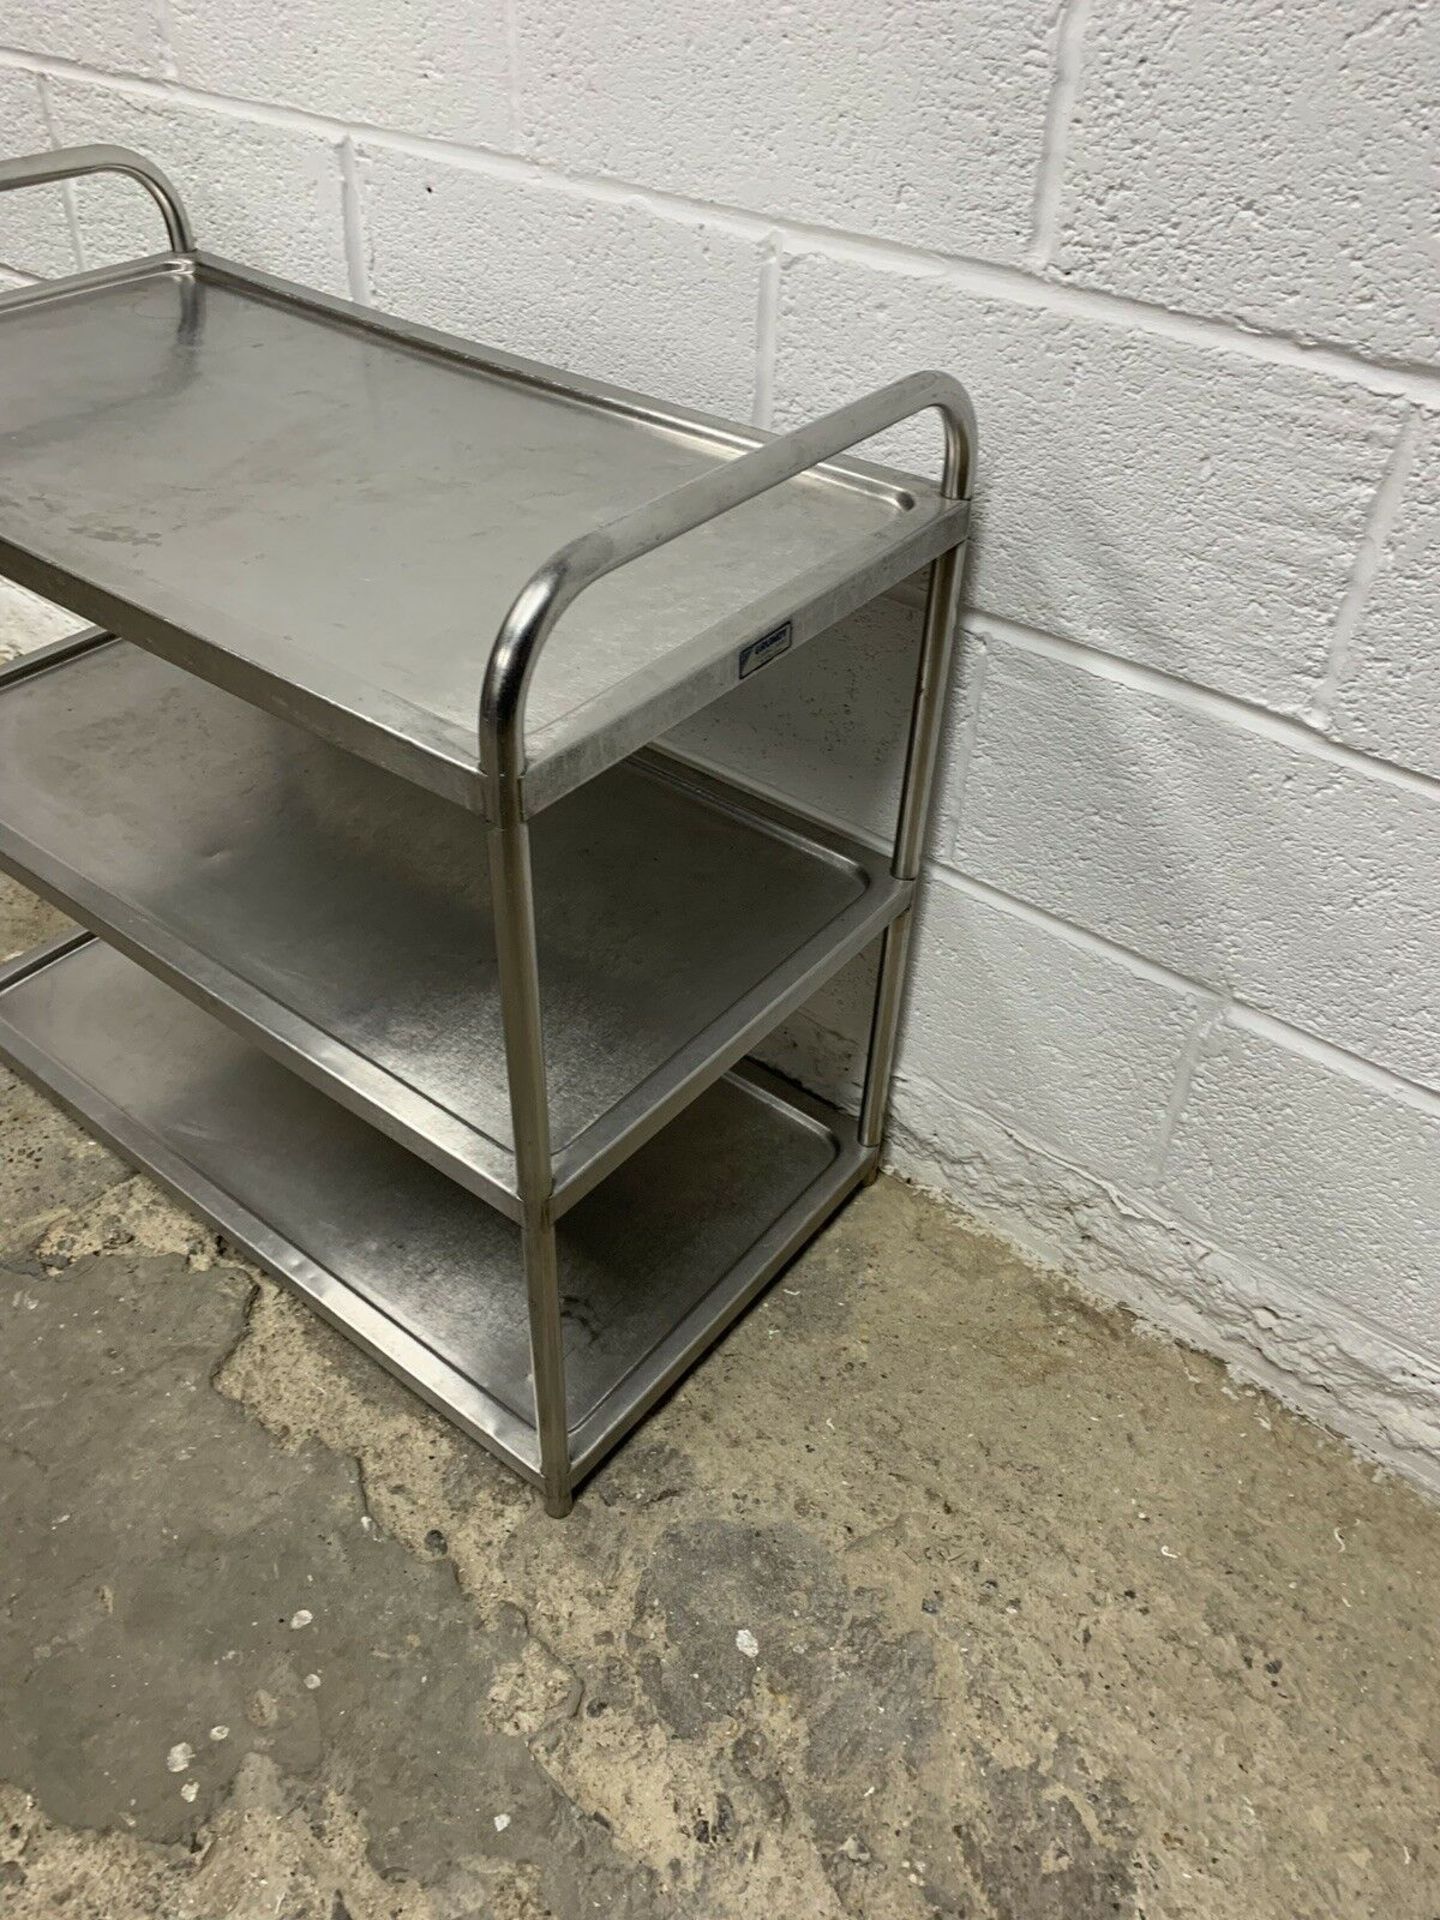 3 Tier Stainless Steel Trolley - Image 3 of 3